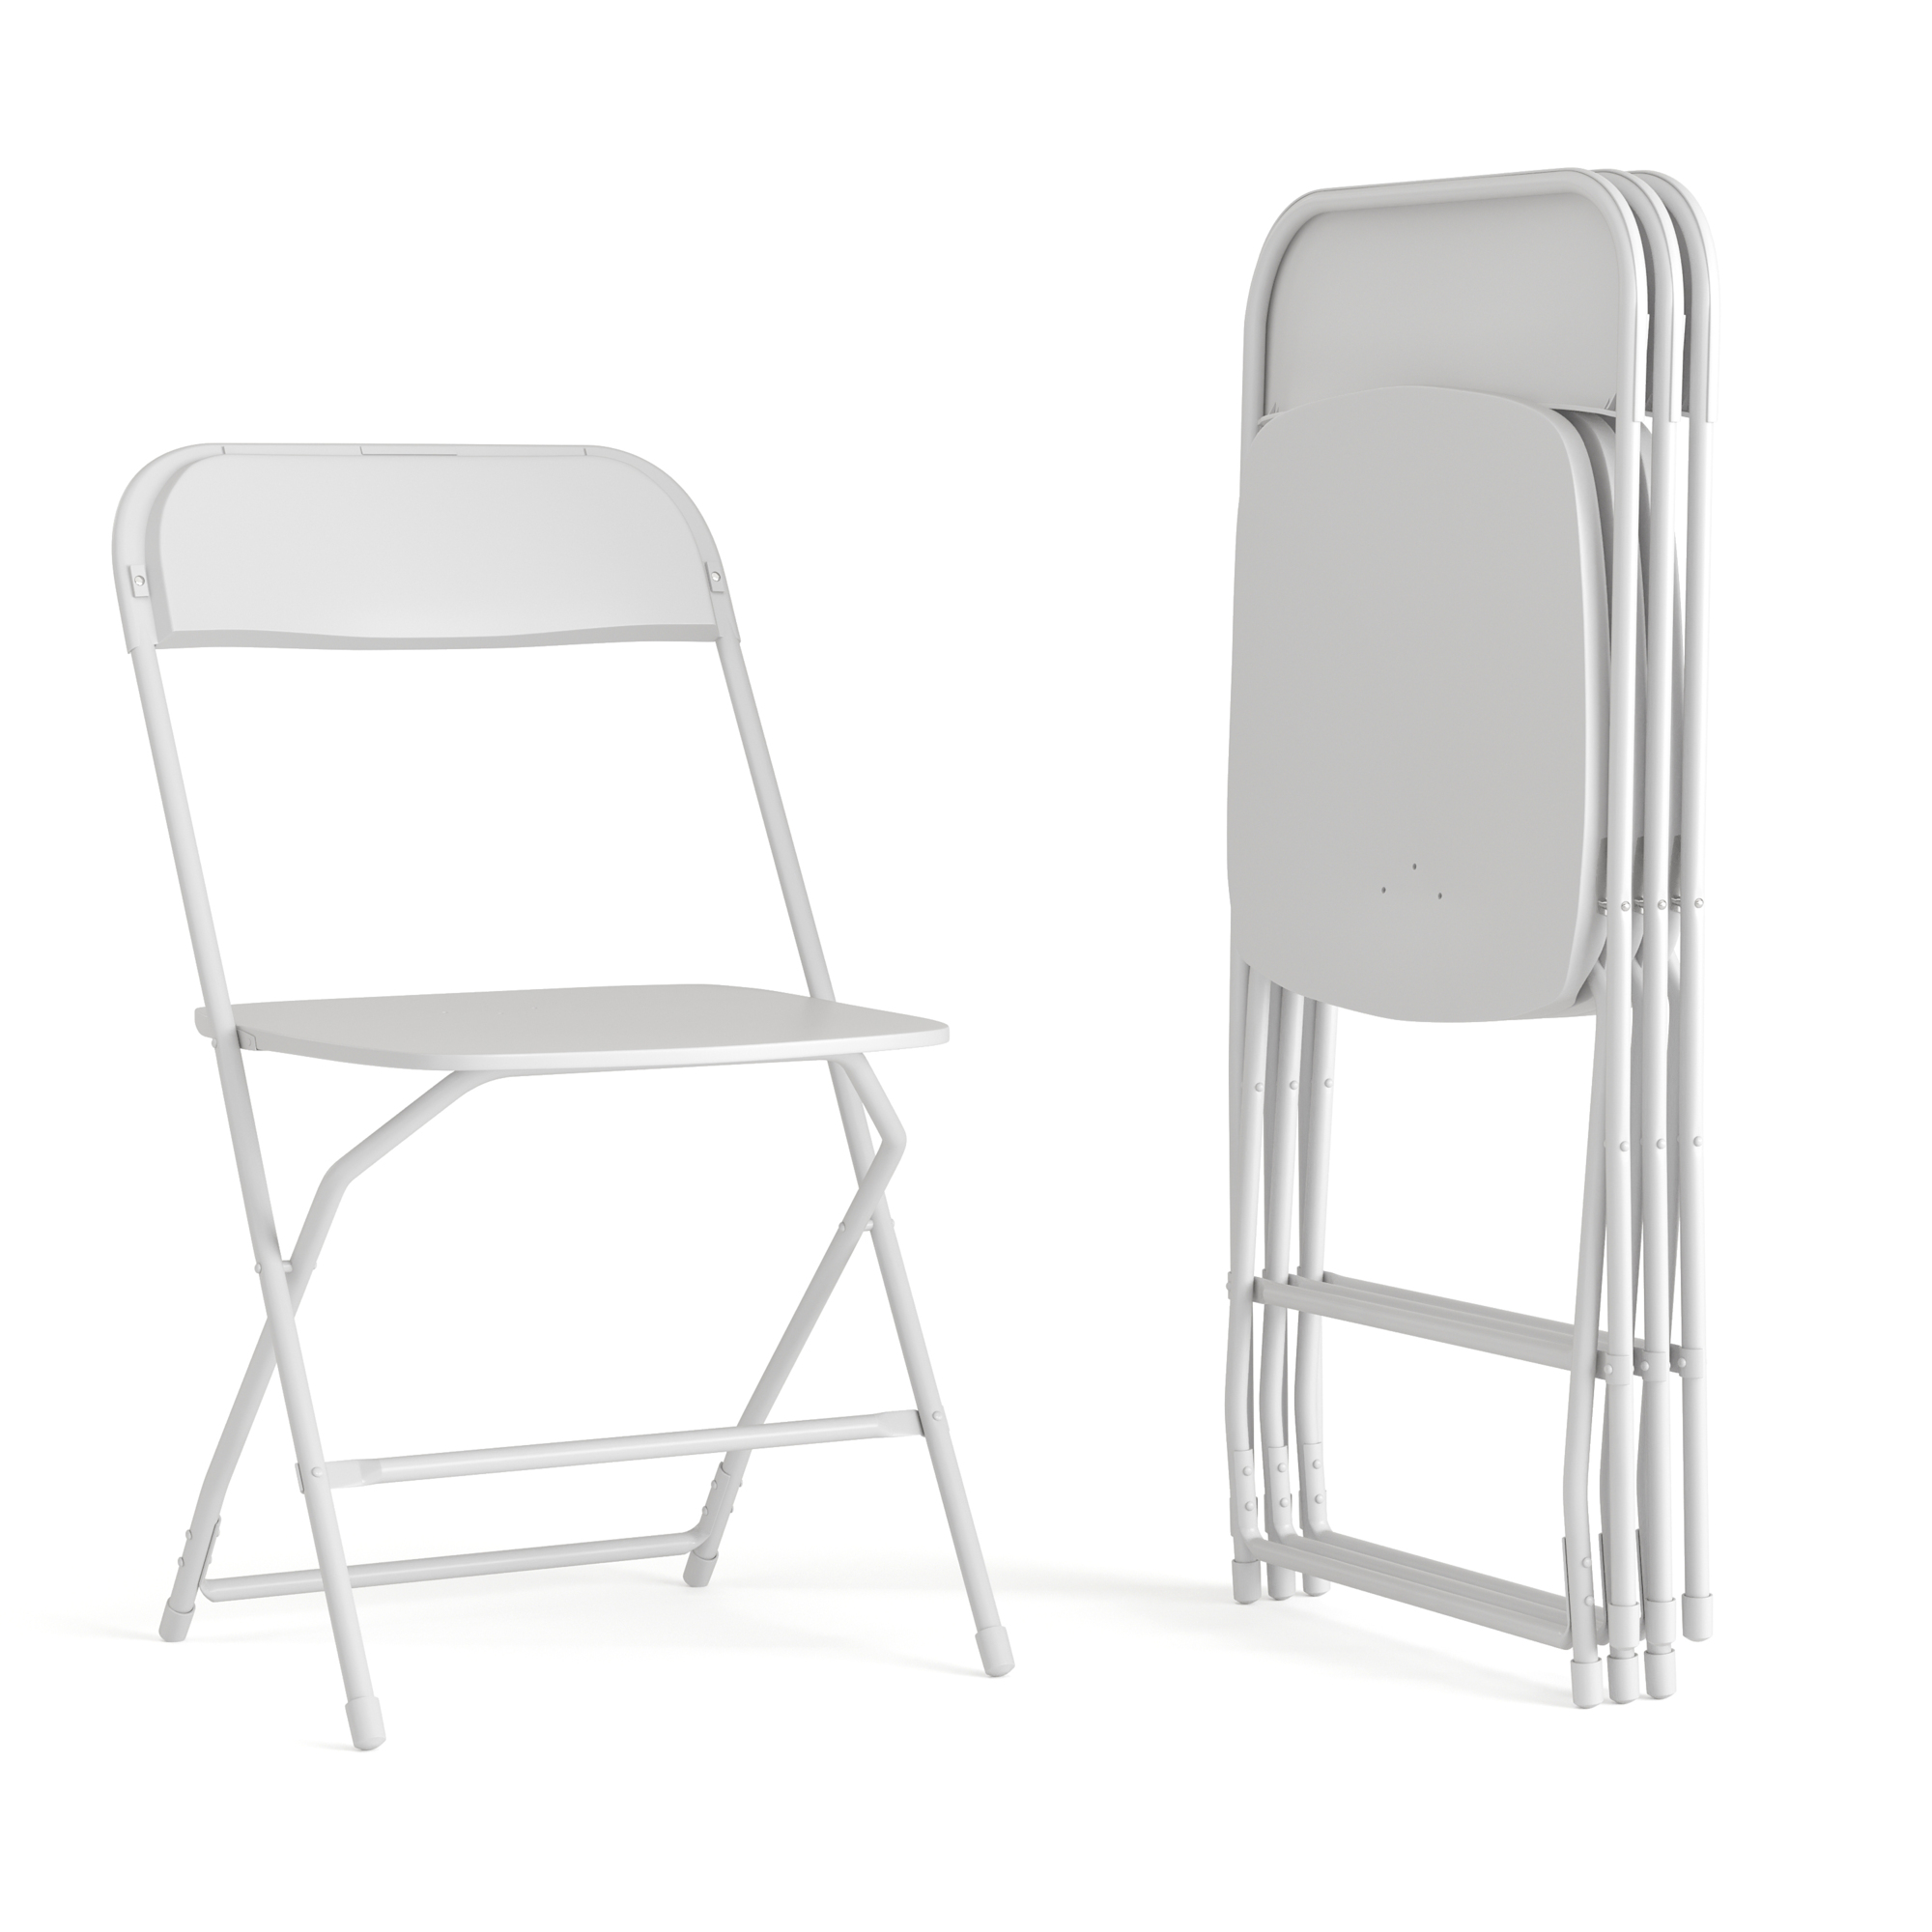 Flash Furniture, 4PK Commercial Grade White Plastic Folding Chairs, Primary Color White, Included (qty.) 4, Model 4LEL3WWH